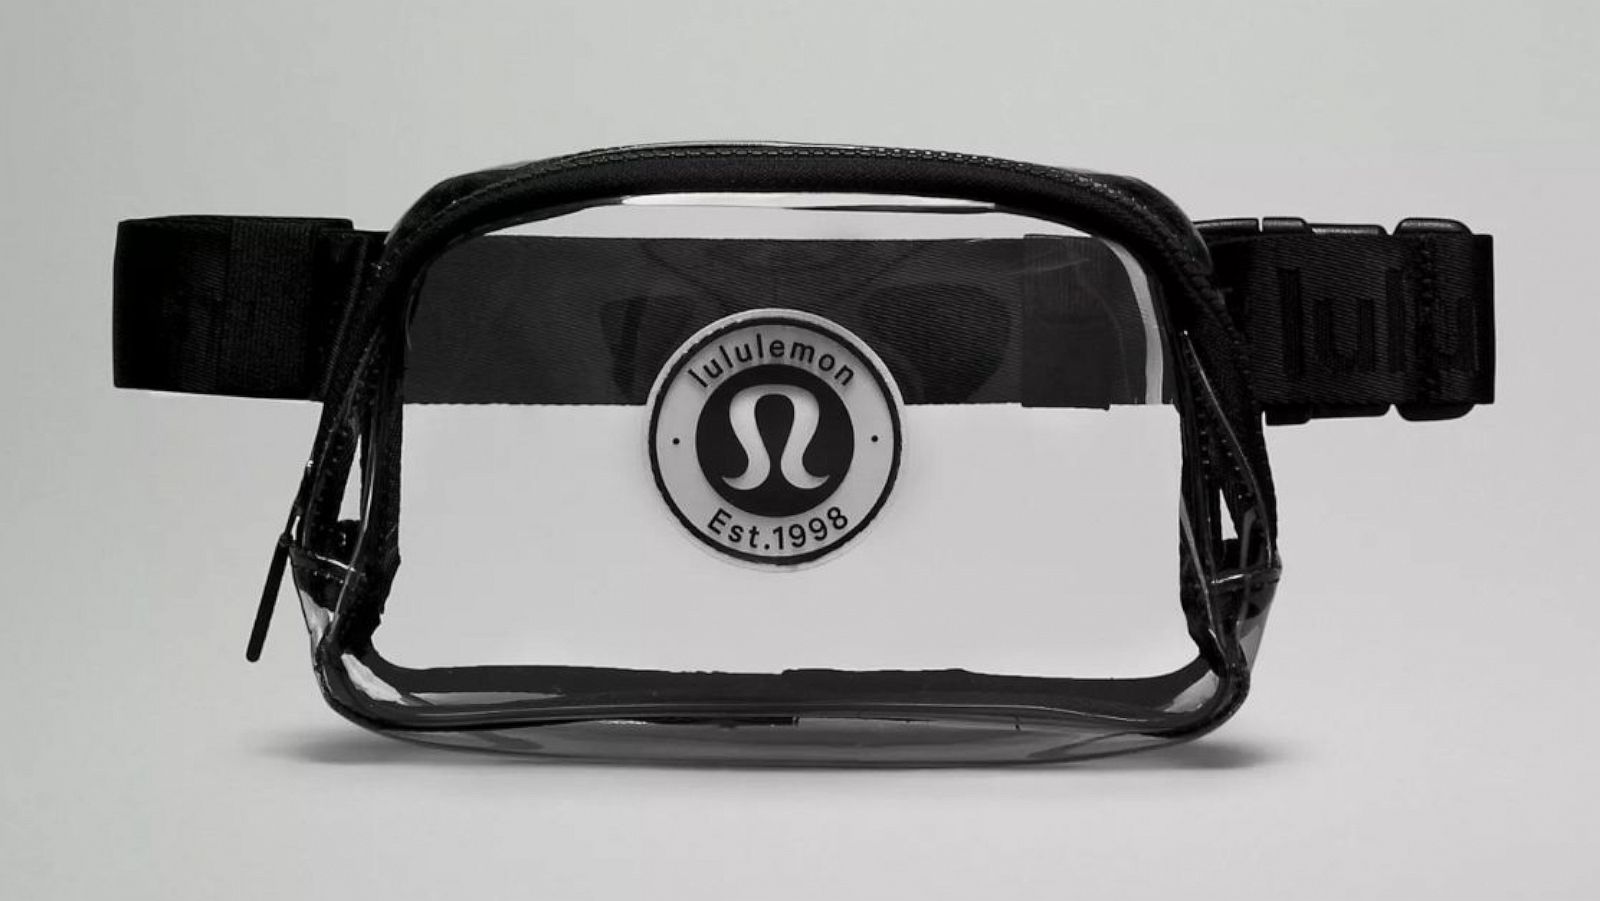 Lululemon now has a clear belt bag: Shop it while you can - Good Morning  America